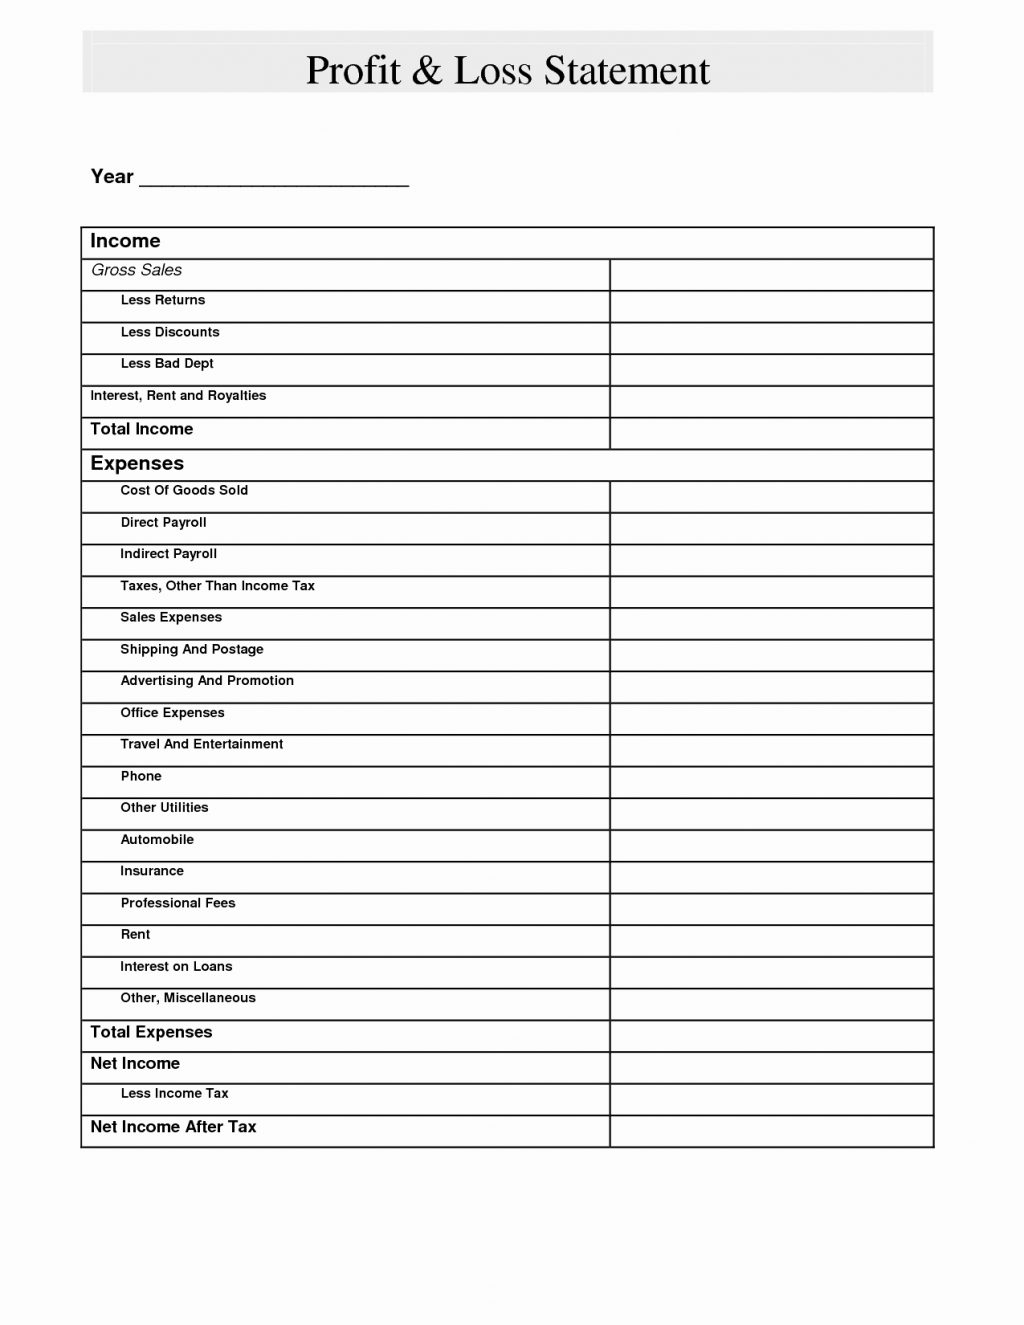 Food Cost Spreadsheet Template Free Pertaining To Food Cost Spread Sheet Awesome Spreadsheet Template Free Example Of